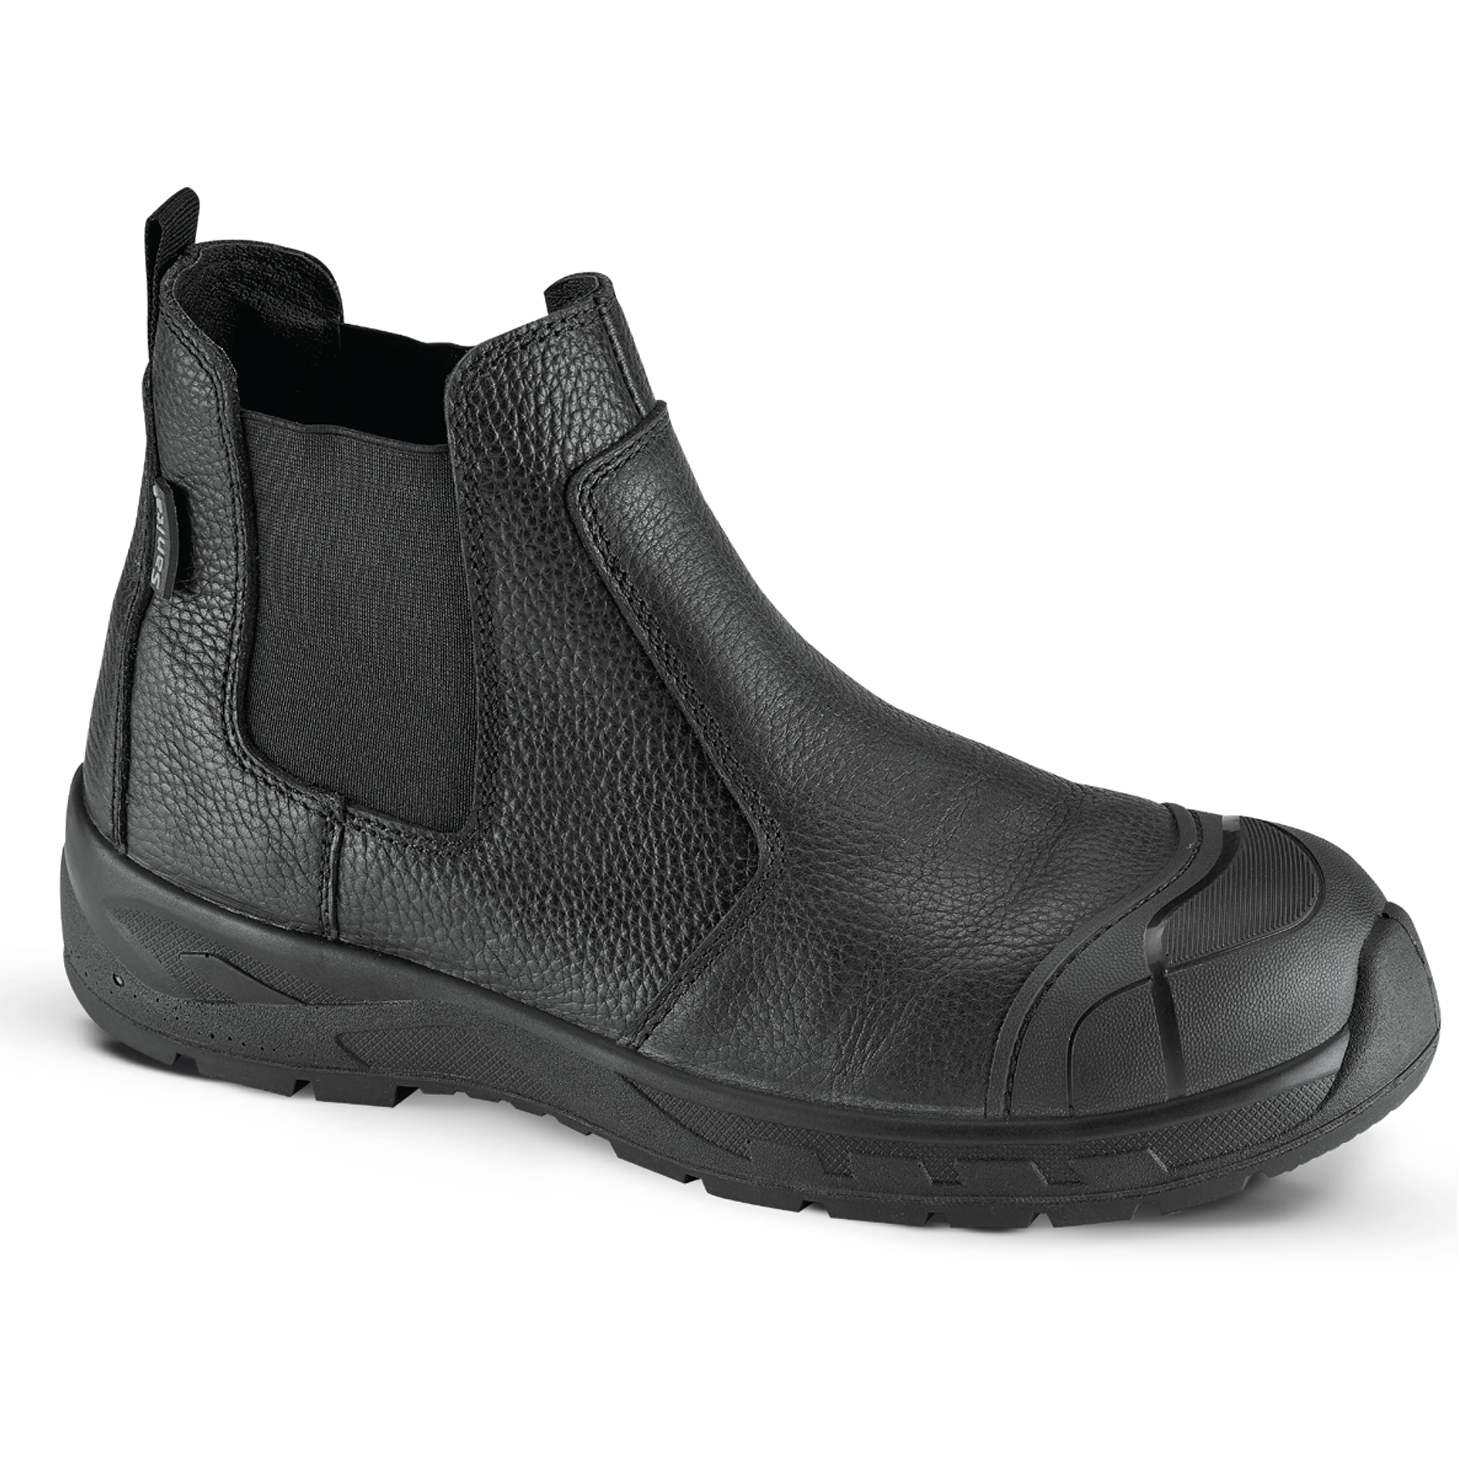 Heavy-duty Workwear Boots For Men's Safety - Sanita